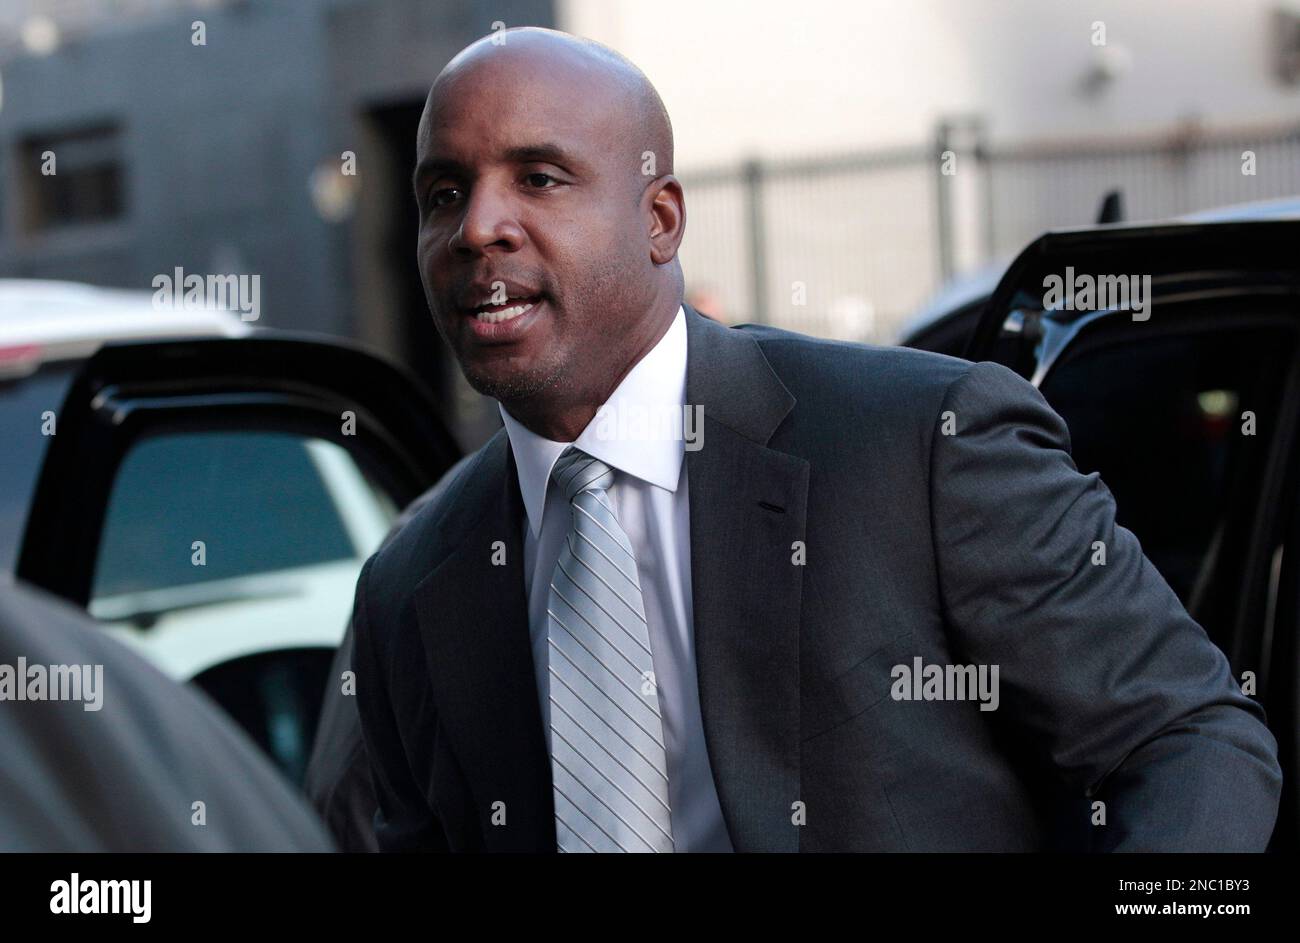 Former baseball player Barry Bonds arrives for his trial at federal court in San Francisco, Tuesday, April 5, 2011. (AP Photo/Jeff Chiu) Stock Photo